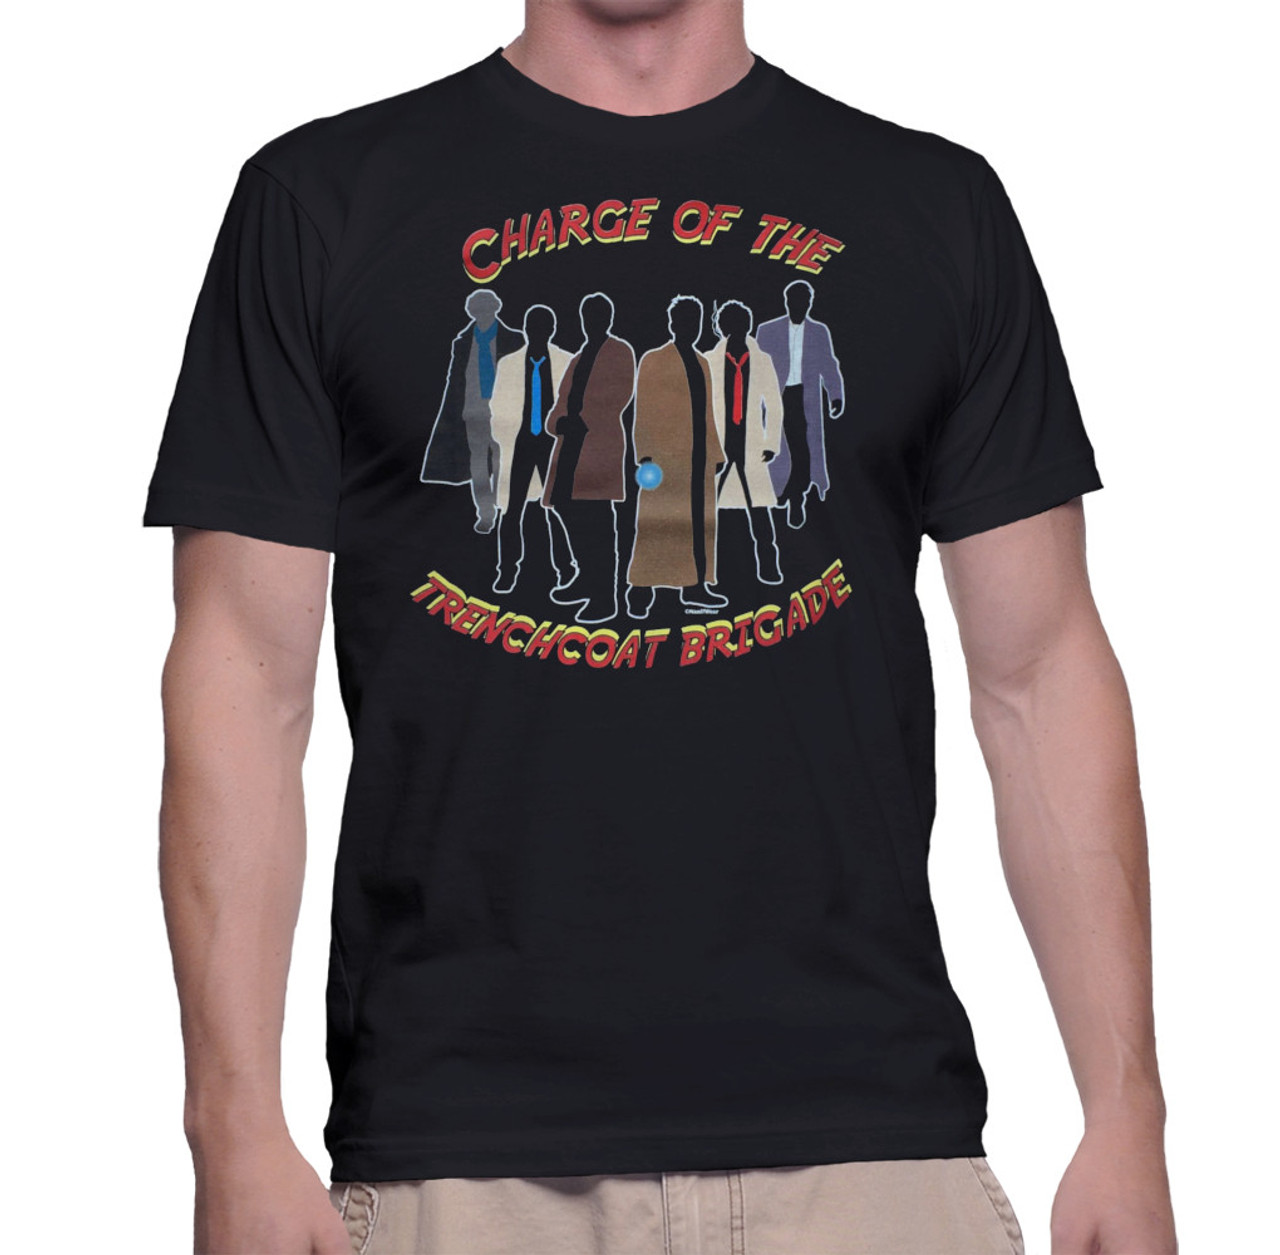 Superheroes Mash-Up Geek T-Shirt Charge of the Trench Coat Brigade